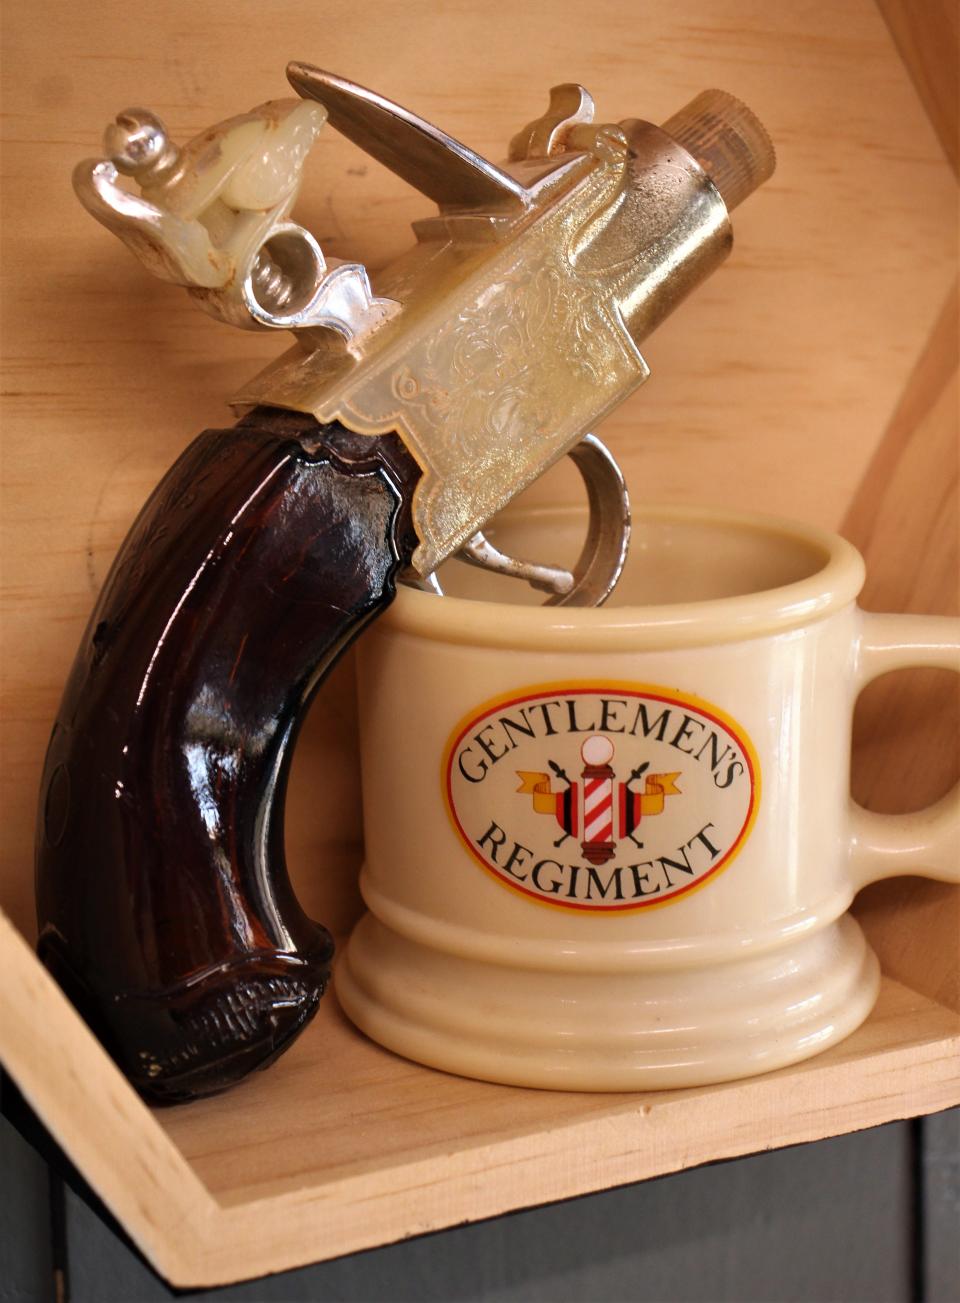 A pistol-shaped bottle of cologne next to a shaving cream cup.